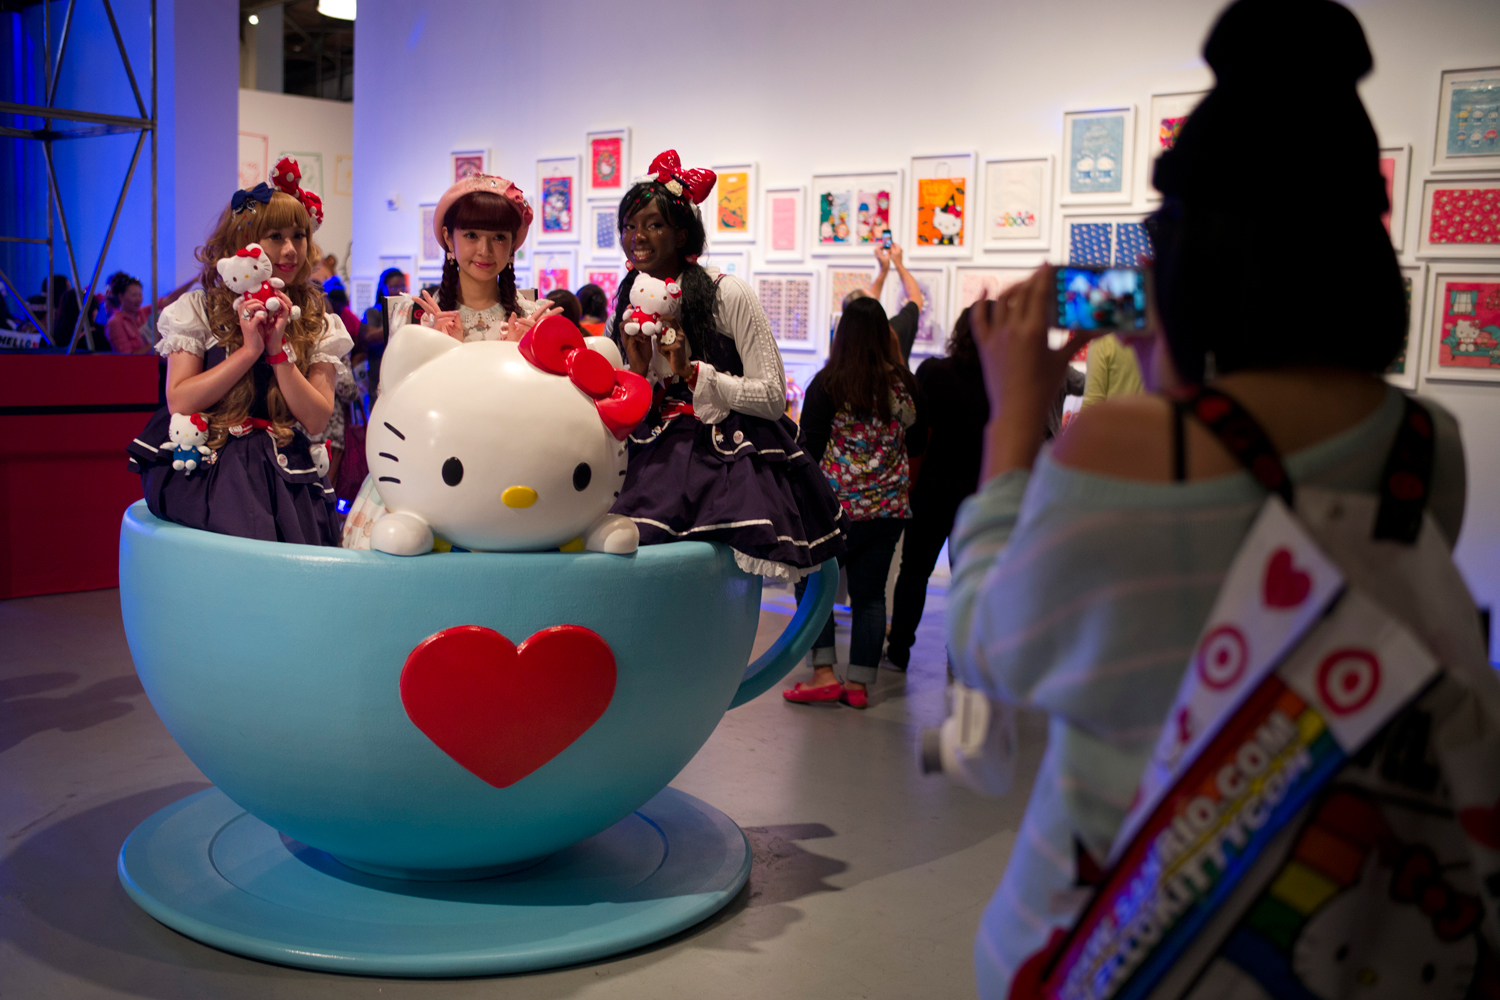 Hello Kitty fans pose for photos in a giant tea cup at the Hello Kitty Con, the first-ever Hello Kitty fan convention, held at the Geffen Contemporary at MOCA, Oct. 30, 2014, in Los Angeles (Jae C. Hong—AP)